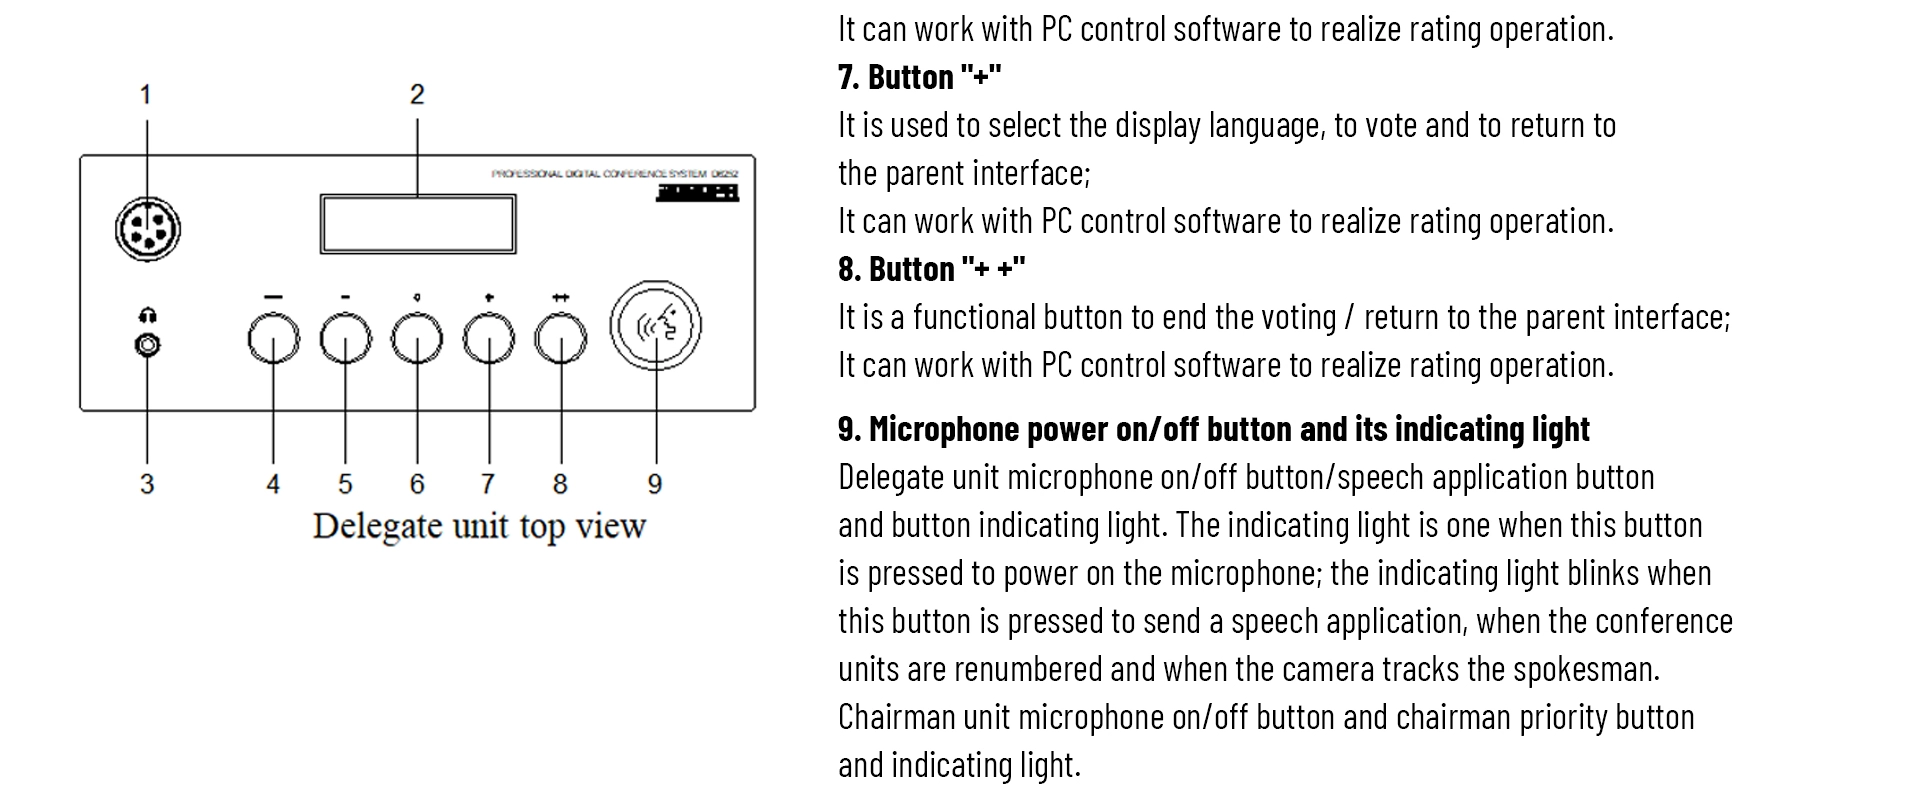 Embedded Chairman Microphone with Voting Function